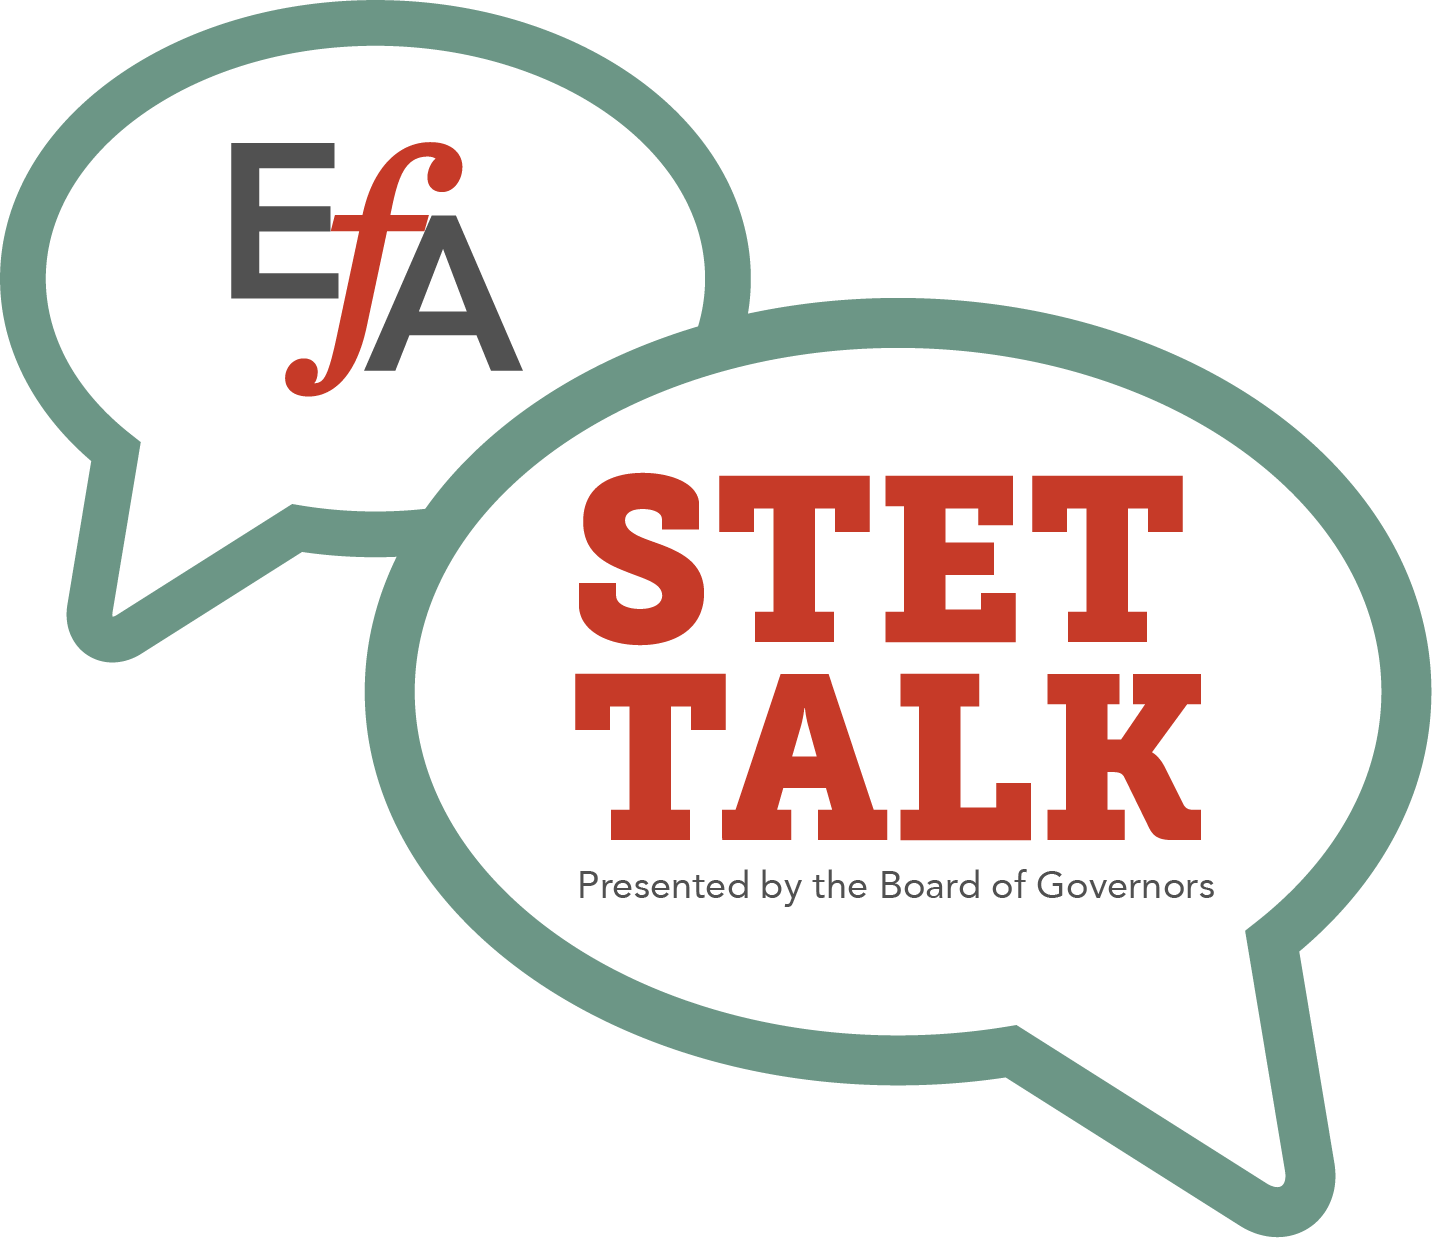 Teal-bordered speech bubbles—one in the background with a gray and red EFA logo and one in the foreground with red and gray text that reads, "Stet Talk Presented by the Board of Governors"